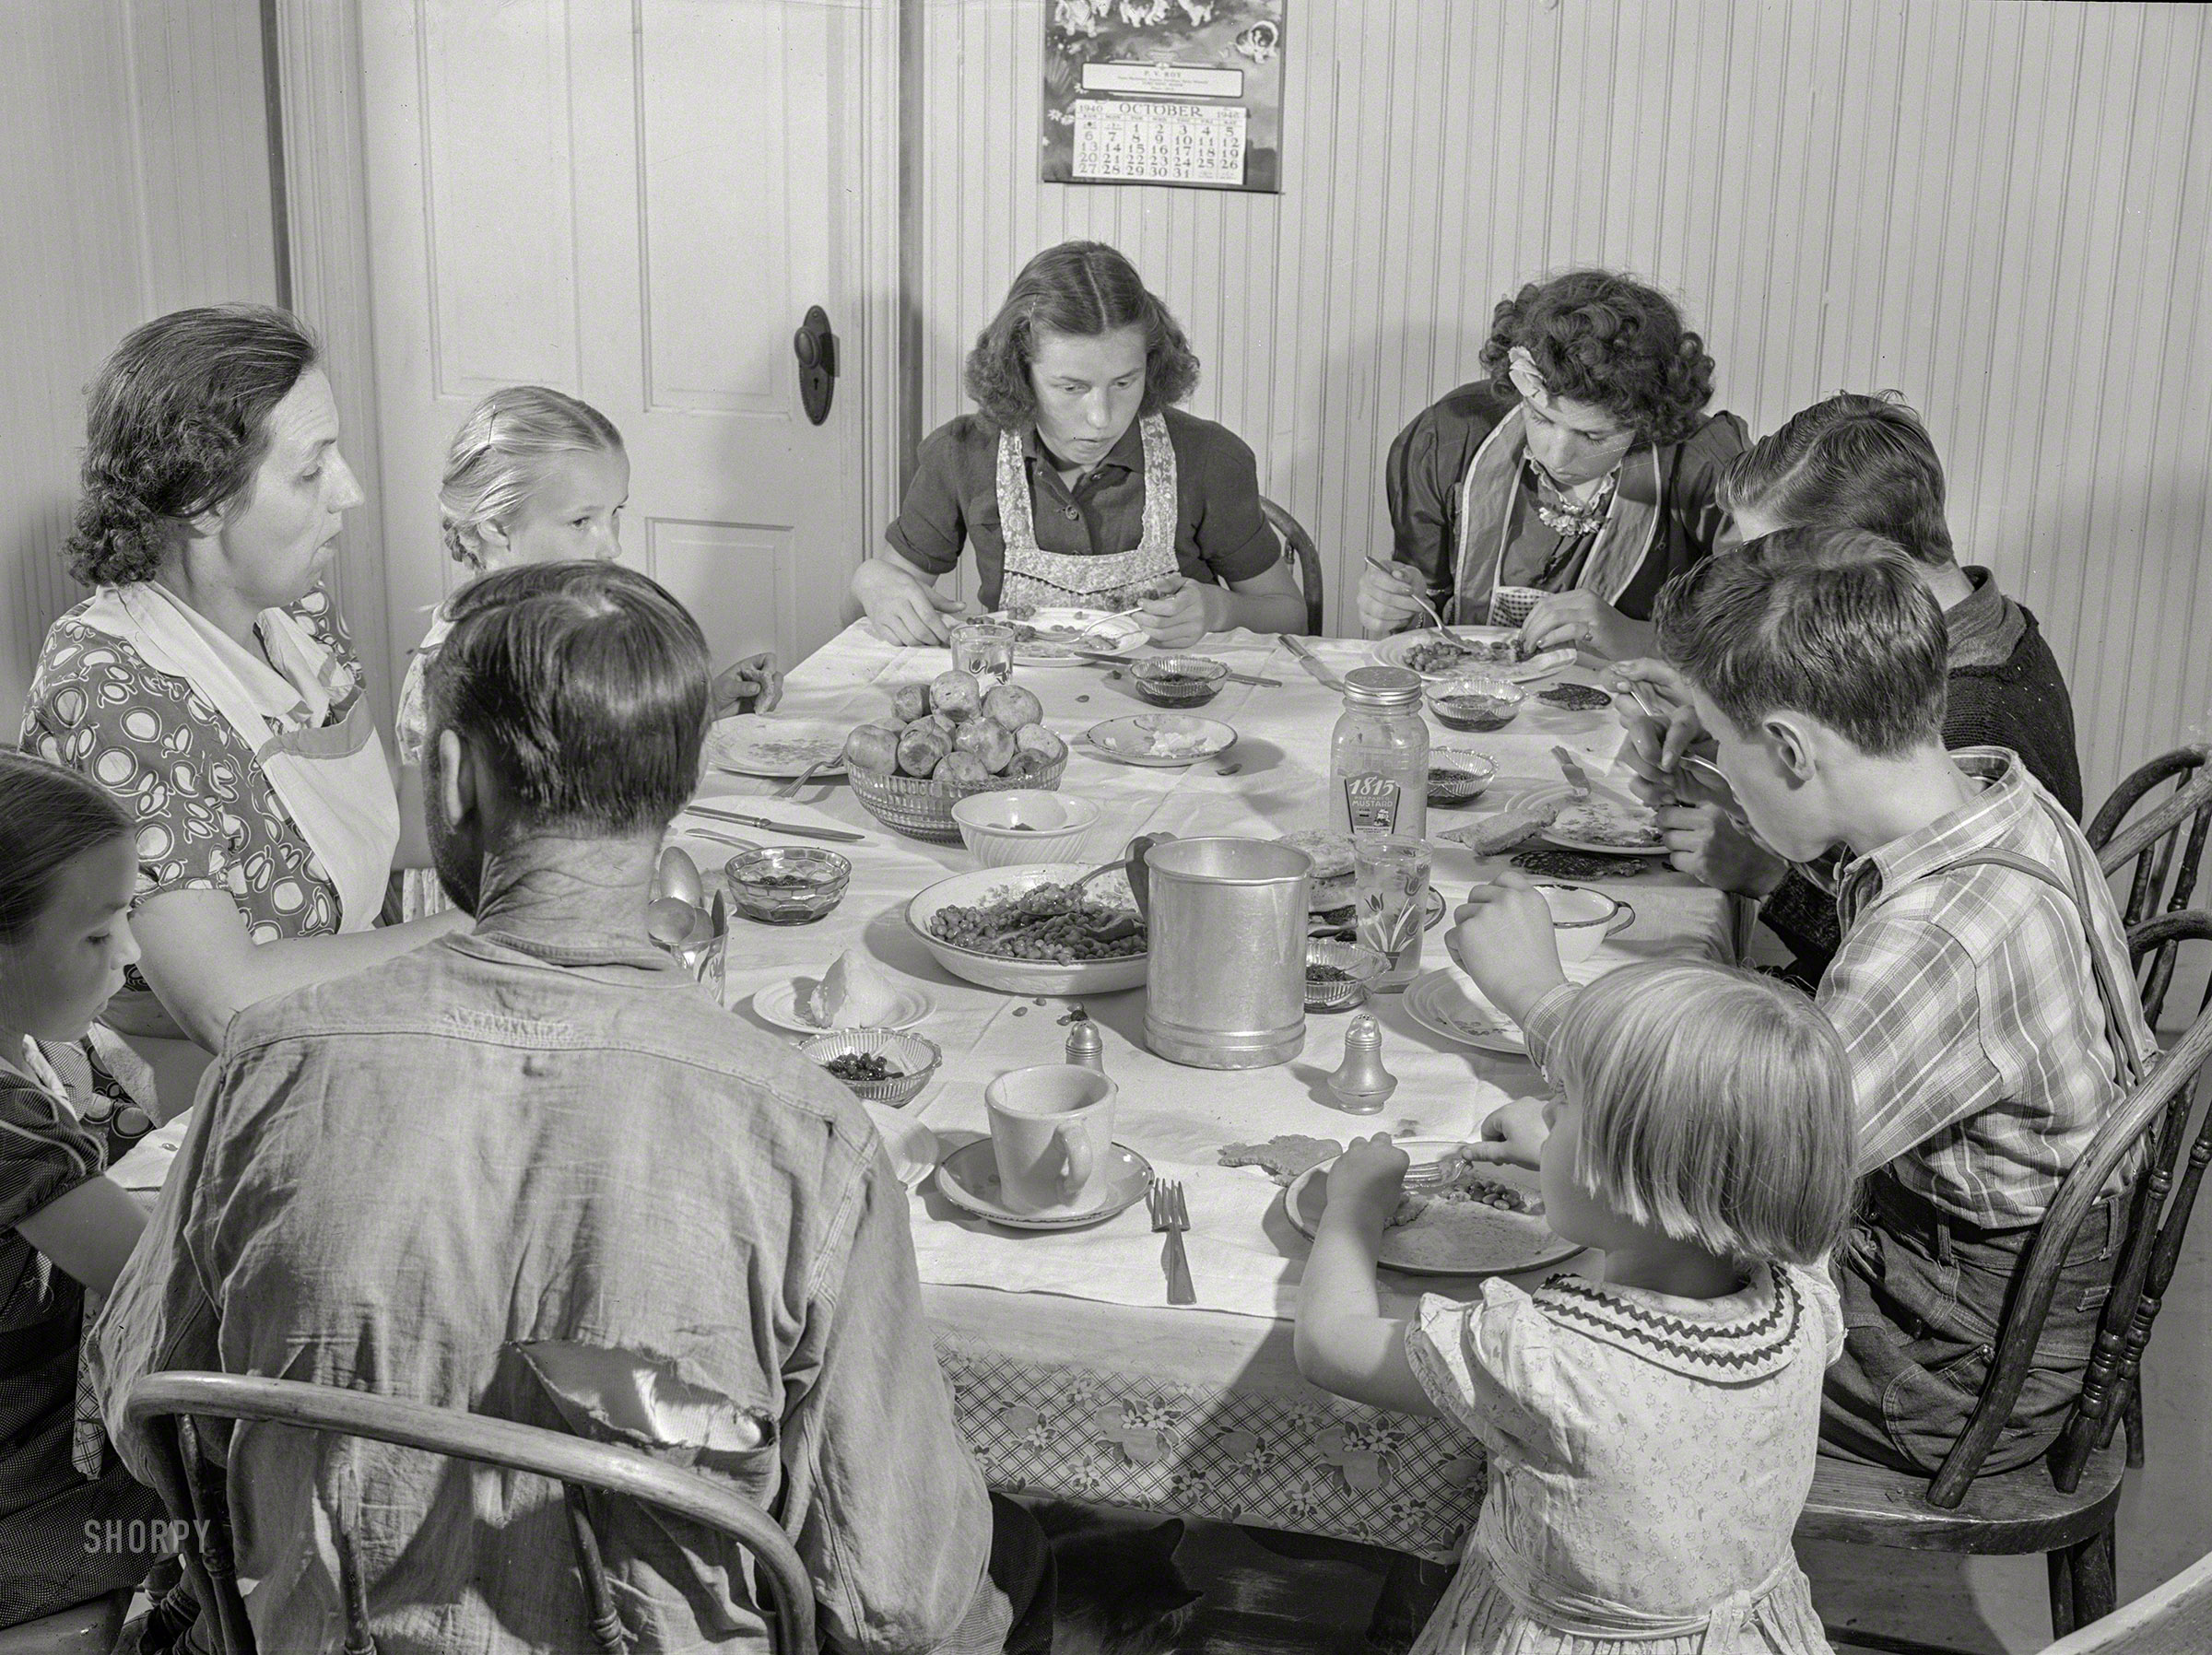 October 1940. "Dinner hour at the home of Mr. J.H. Dube, French-Canadian potato farmer, after he and the boys had finished a day's work in their potato field in Wallagrass, Maine." Medium format negative by Jack Delano for the Farm Security Administration. View full size.